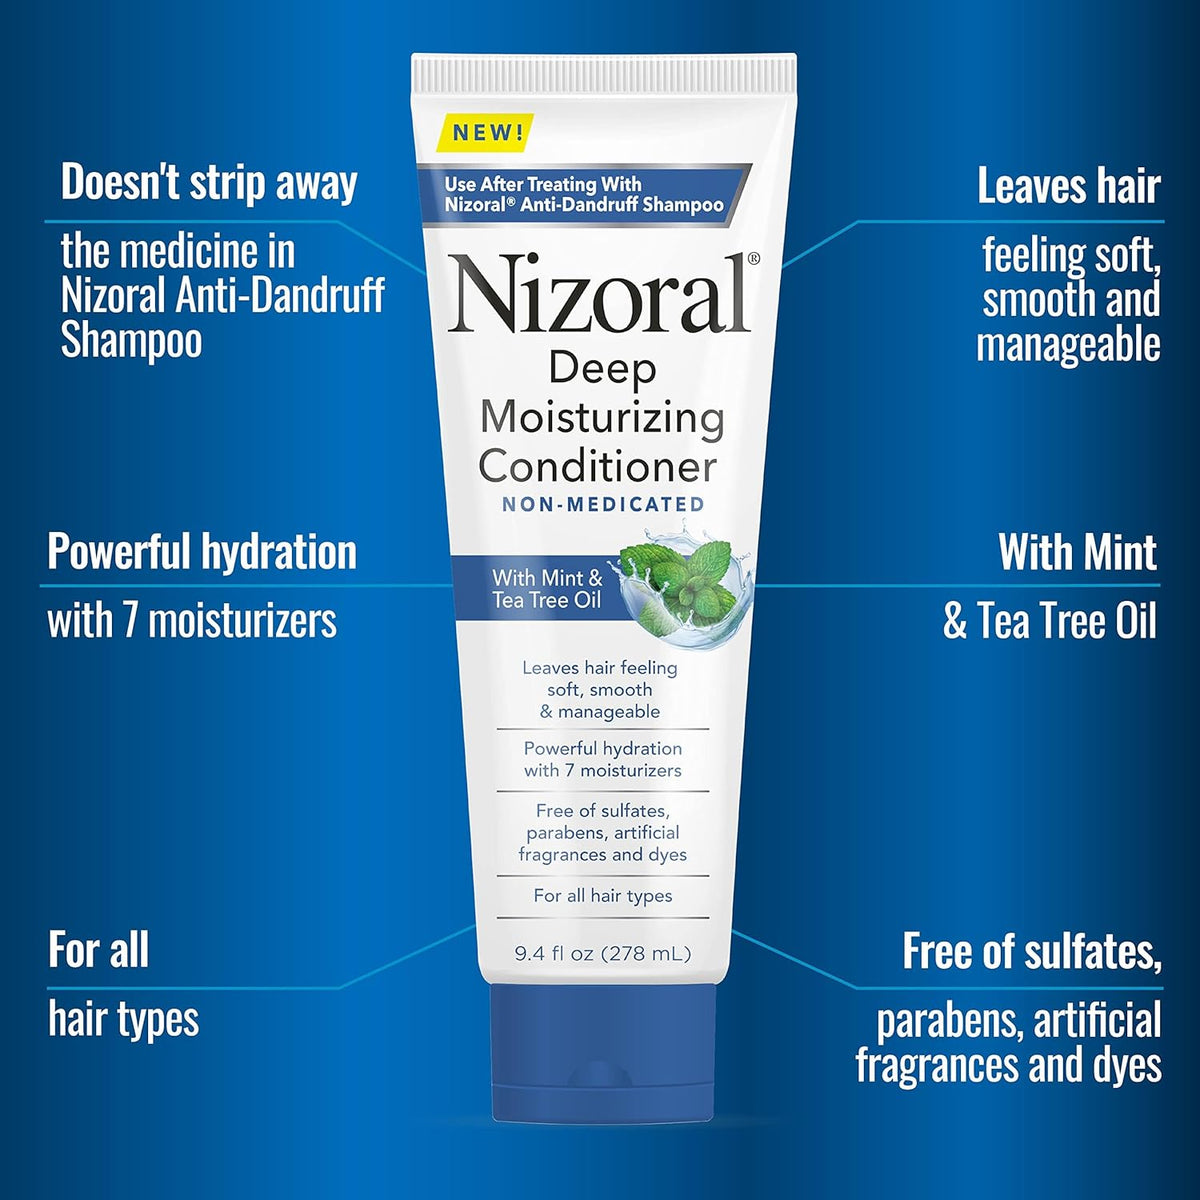 Nizoral Deep Moisturizing Conditioner with Mint & Tea Tree Oil for All Hair Types - Free of Sulfates, Parabens, Artificial Fragrances and Dyes, 9.4 oz, ym-01